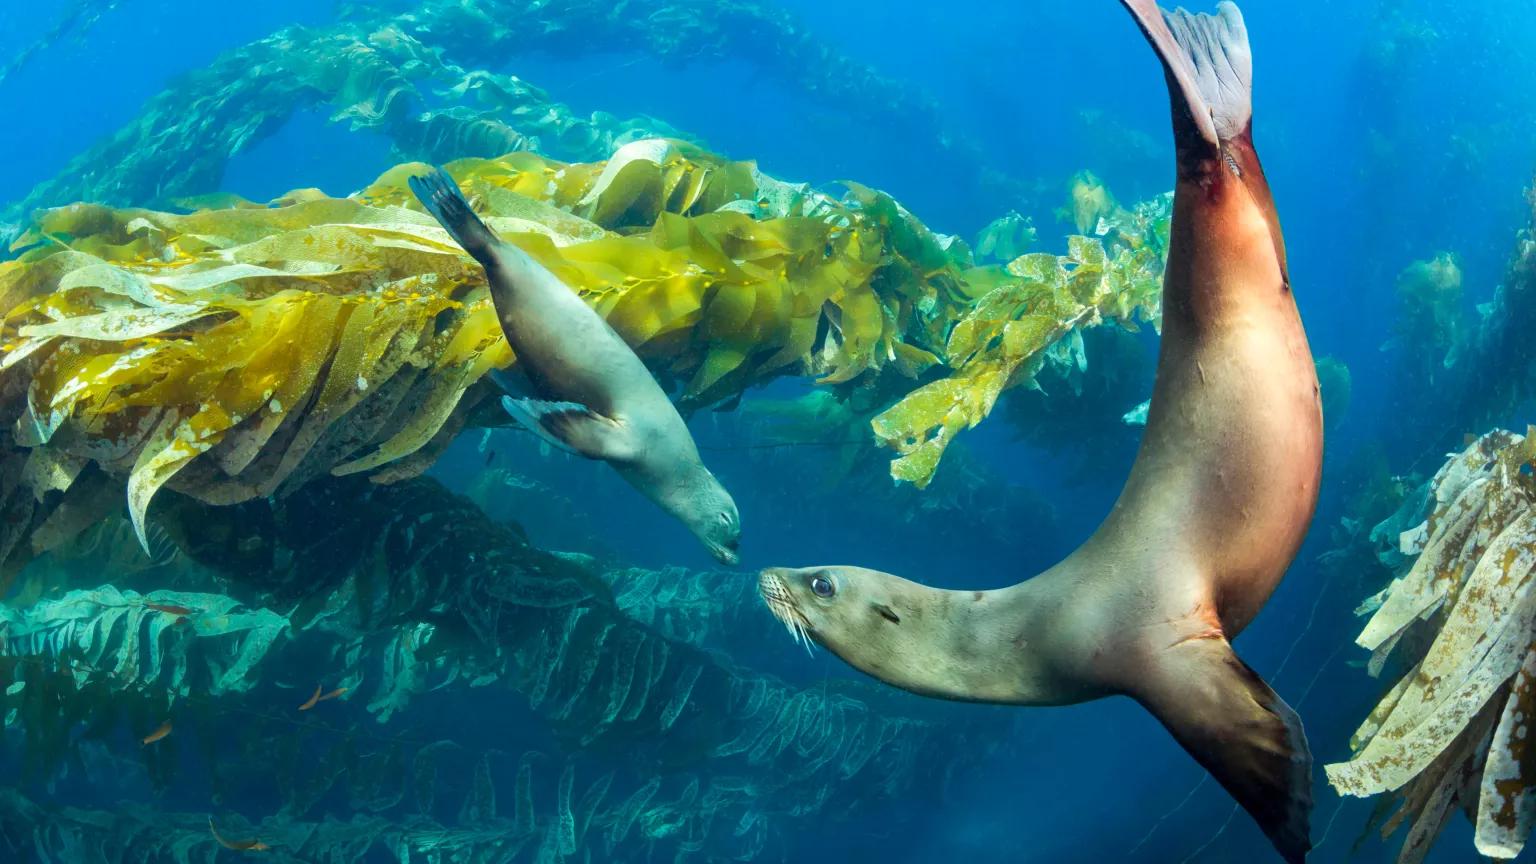 A seal and her pup swimmng underwater in clear water among kelp